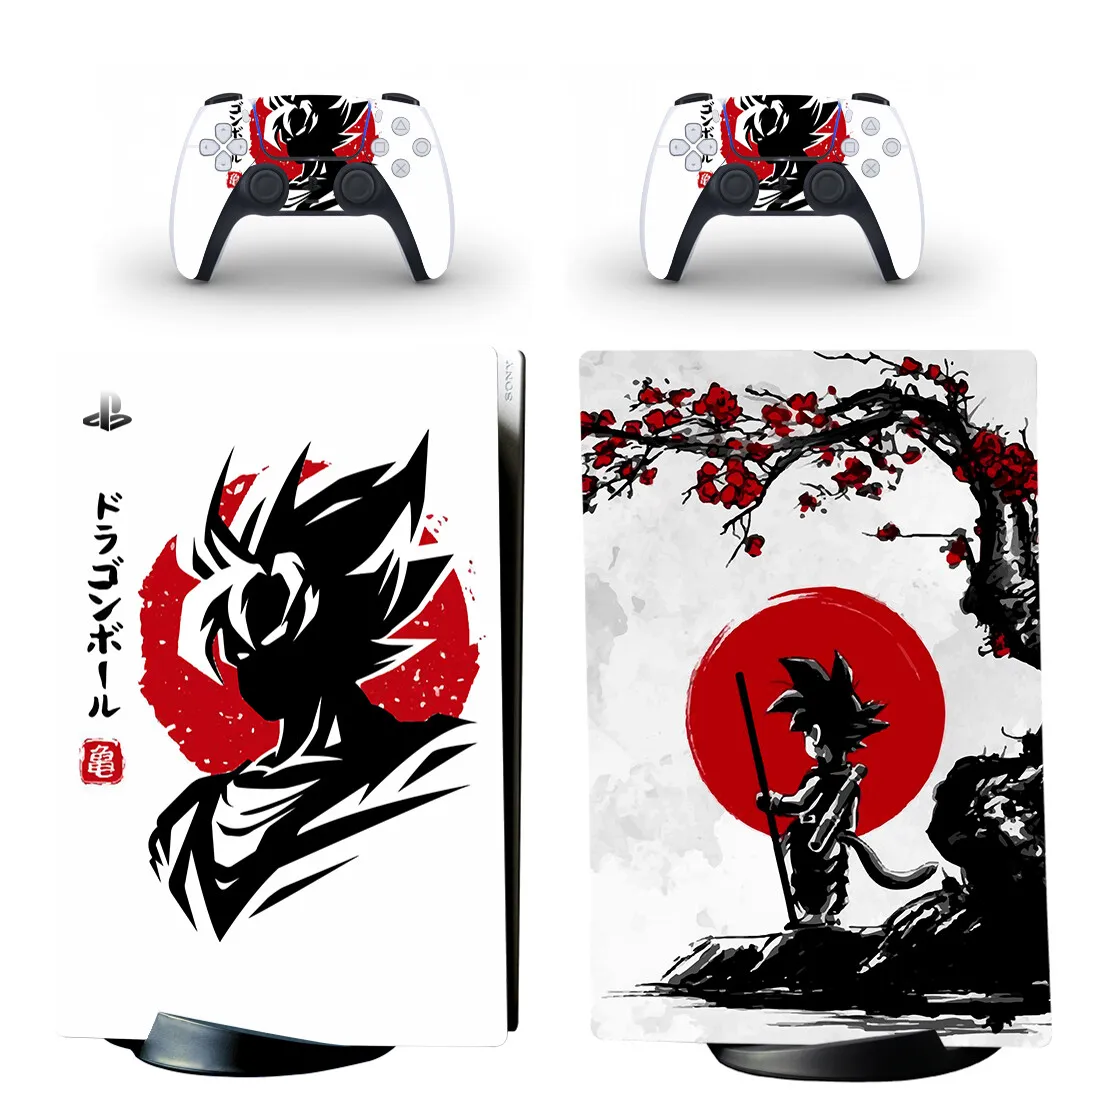 

Goku Vegeta PS5 Digital Edition Skin Sticker Decal Cover for PlayStation 5 Console and Controllers PS5 Skin Sticker Vinyl